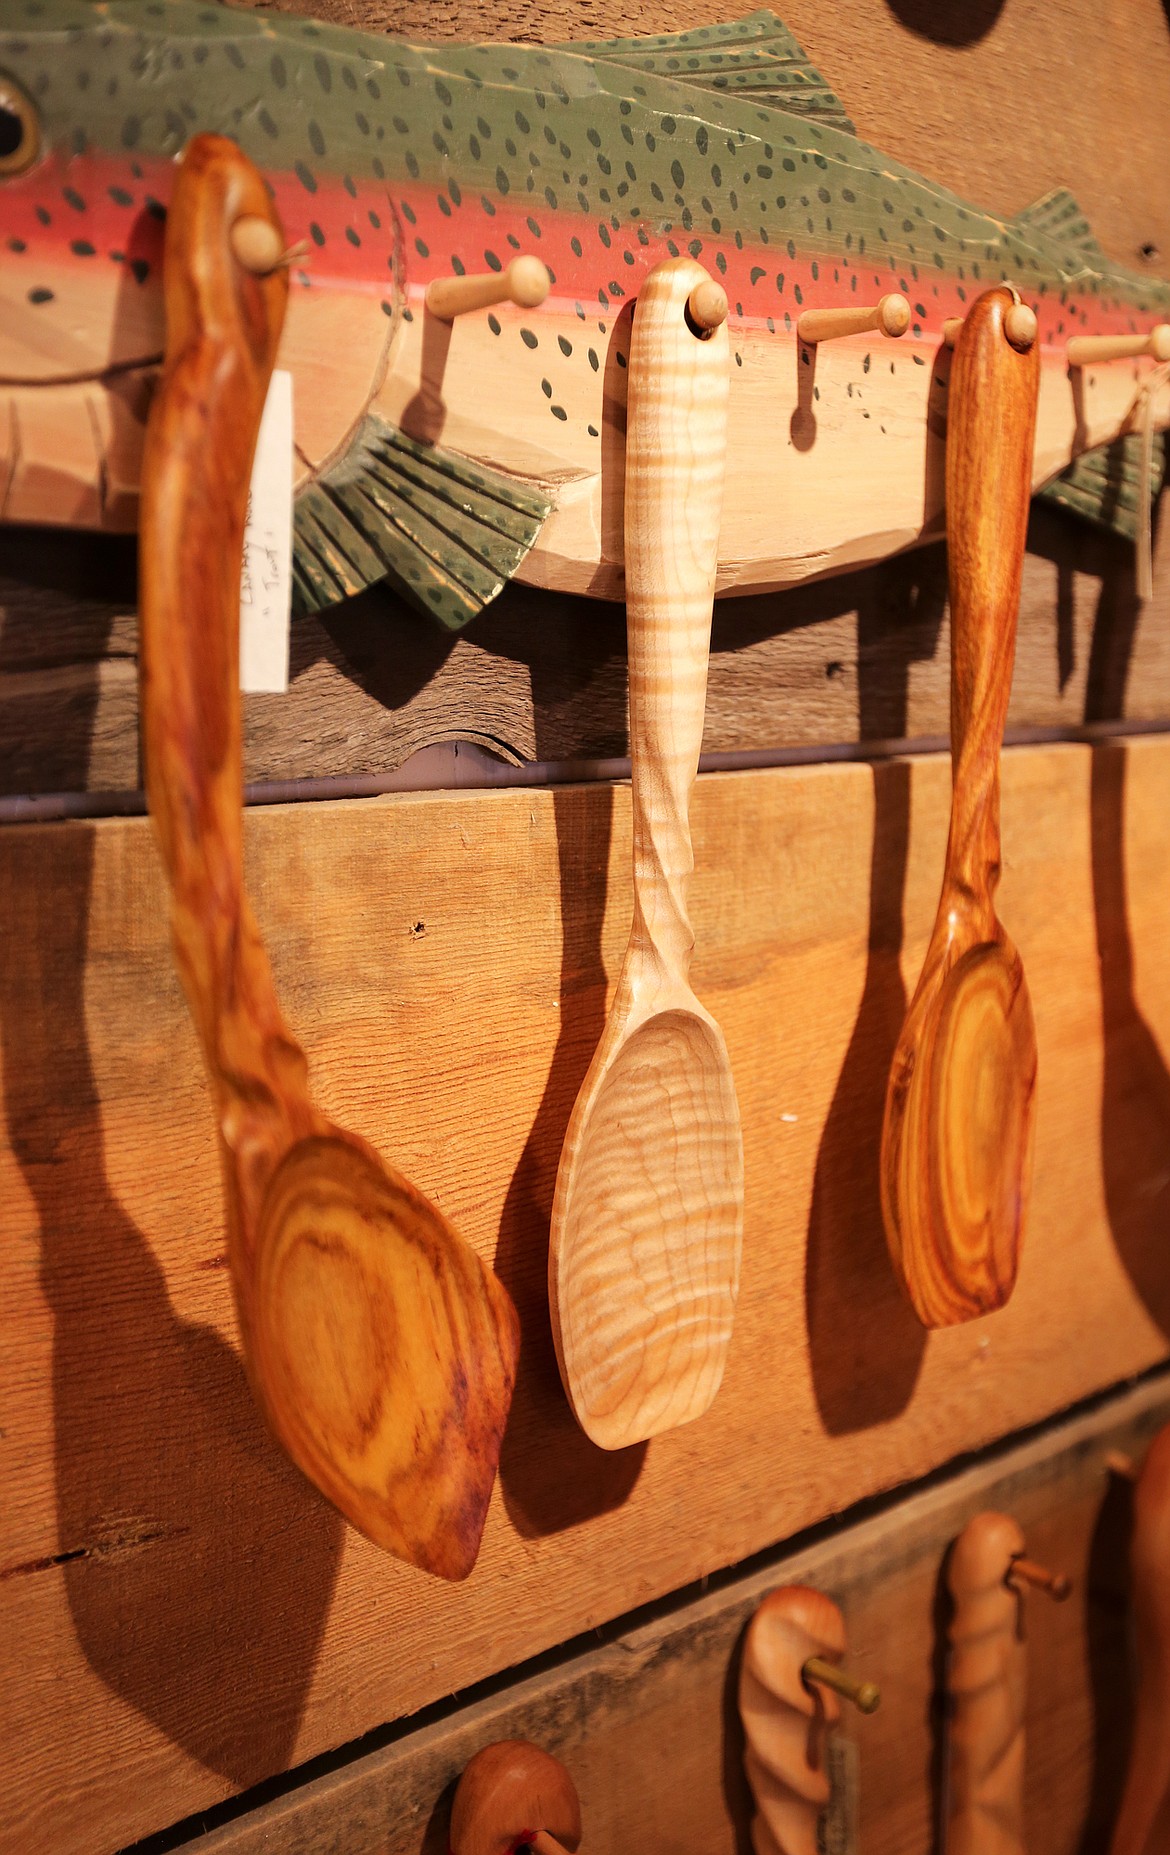 Sturdy wooden spoons are displayed on a wall inside the Spiral Spoon.